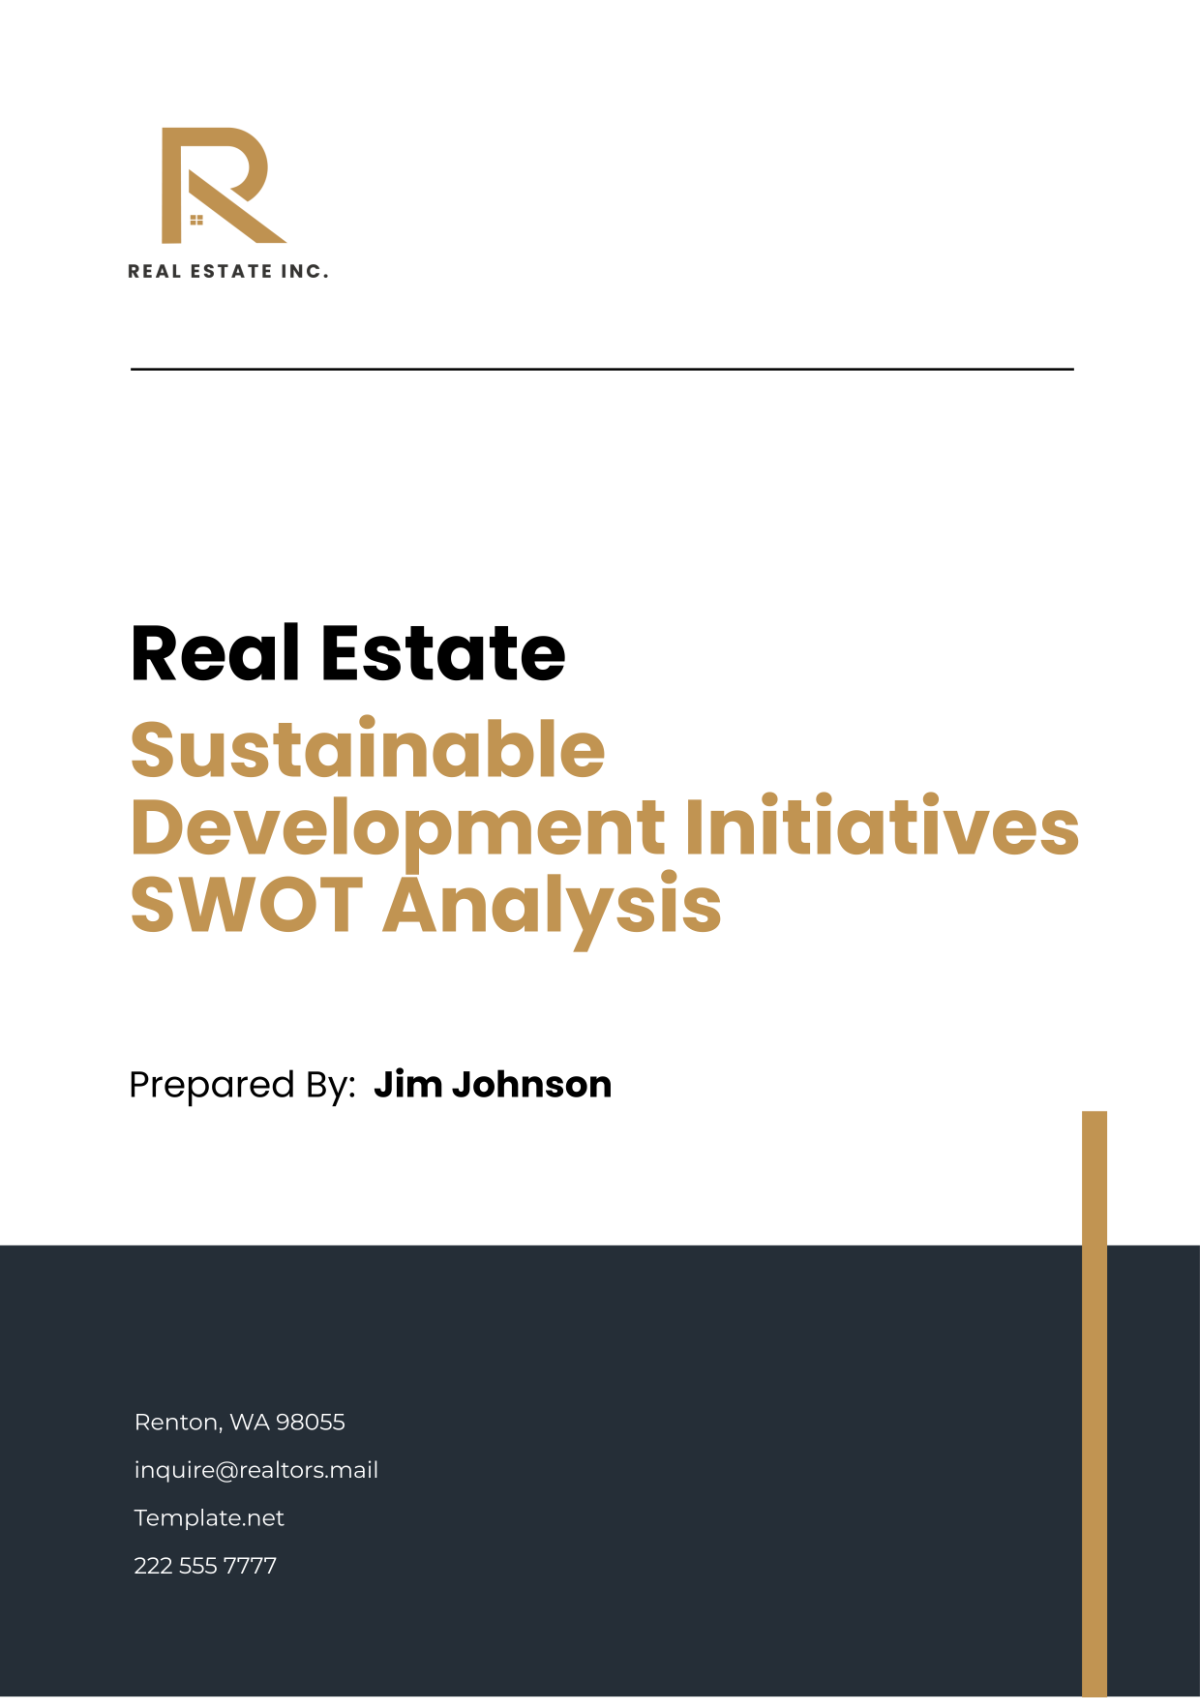 Real Estate Sustainable Development Initiatives SWOT Analysis Template